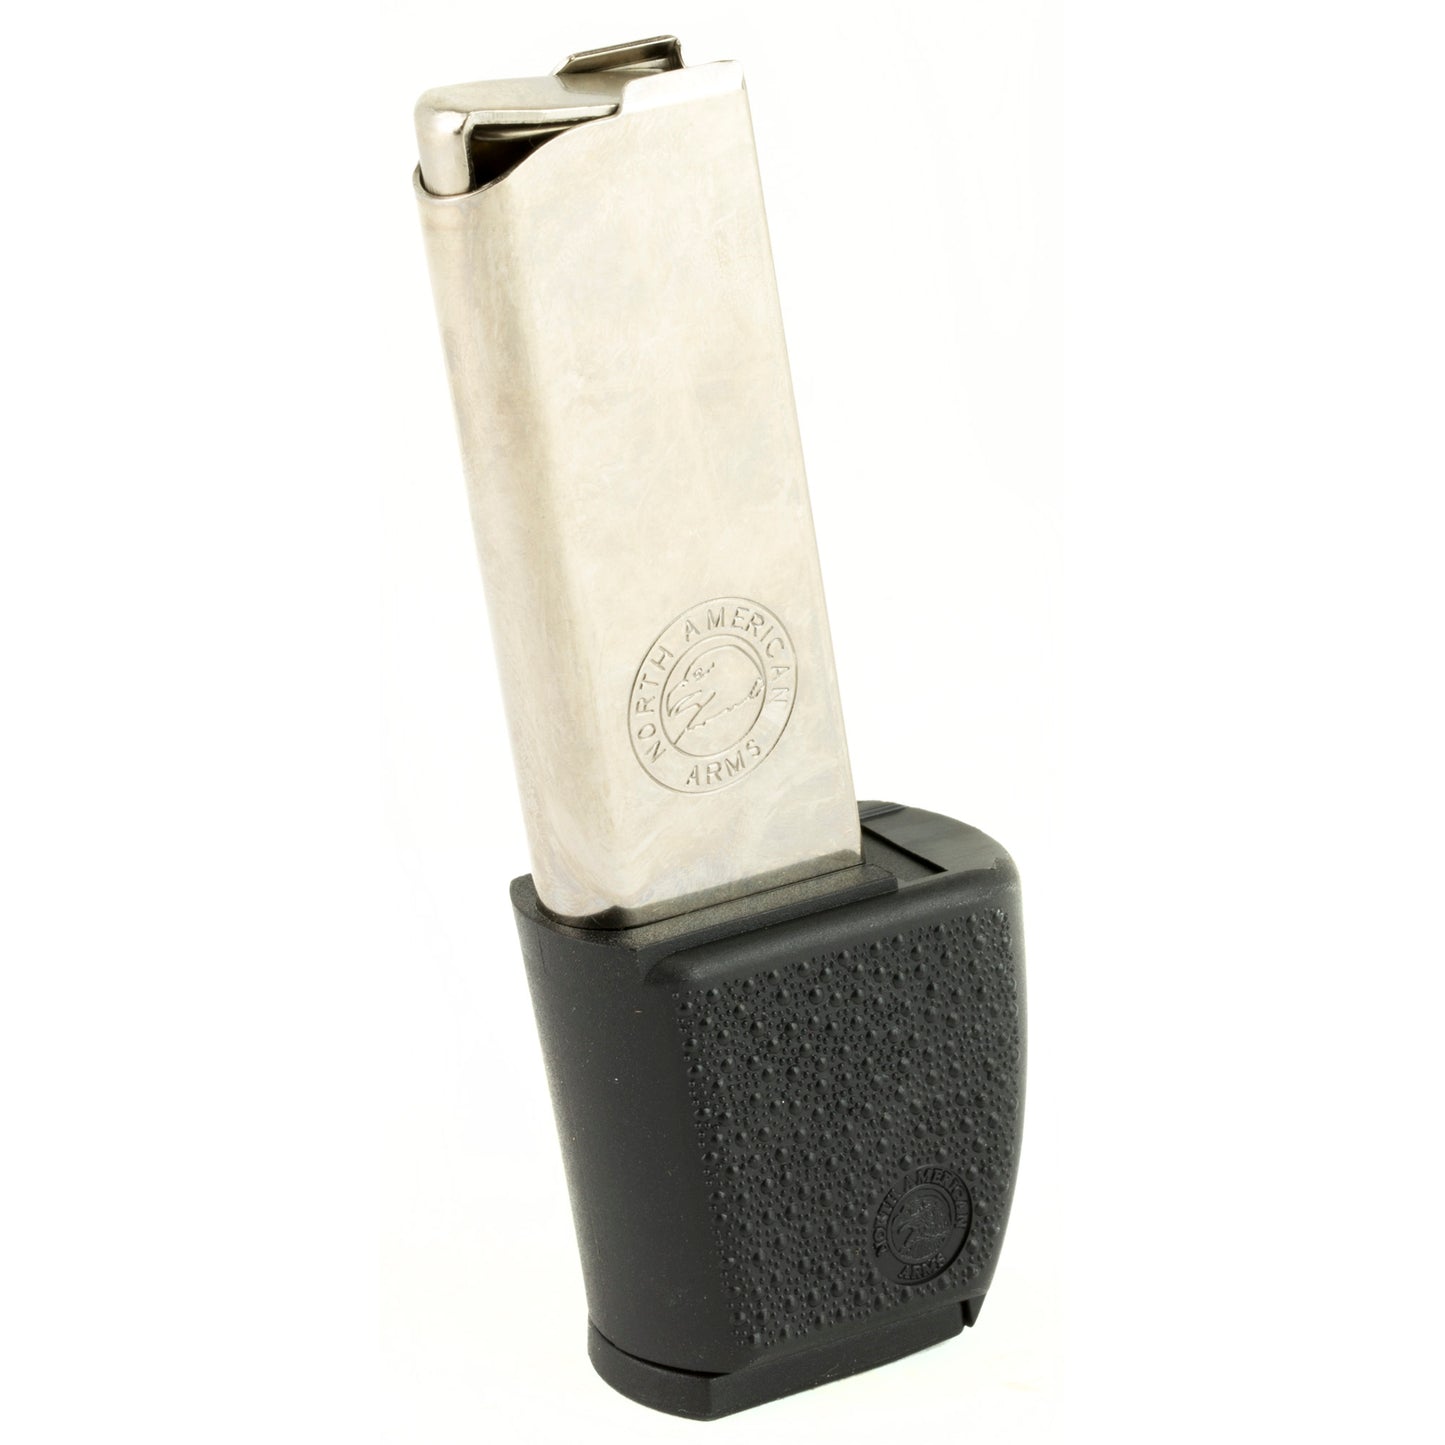 North American Arms Magazine 32 ACP 10 Rounds Fits Guardian Stainless MZ-32-EXT - California Shooting Supplies